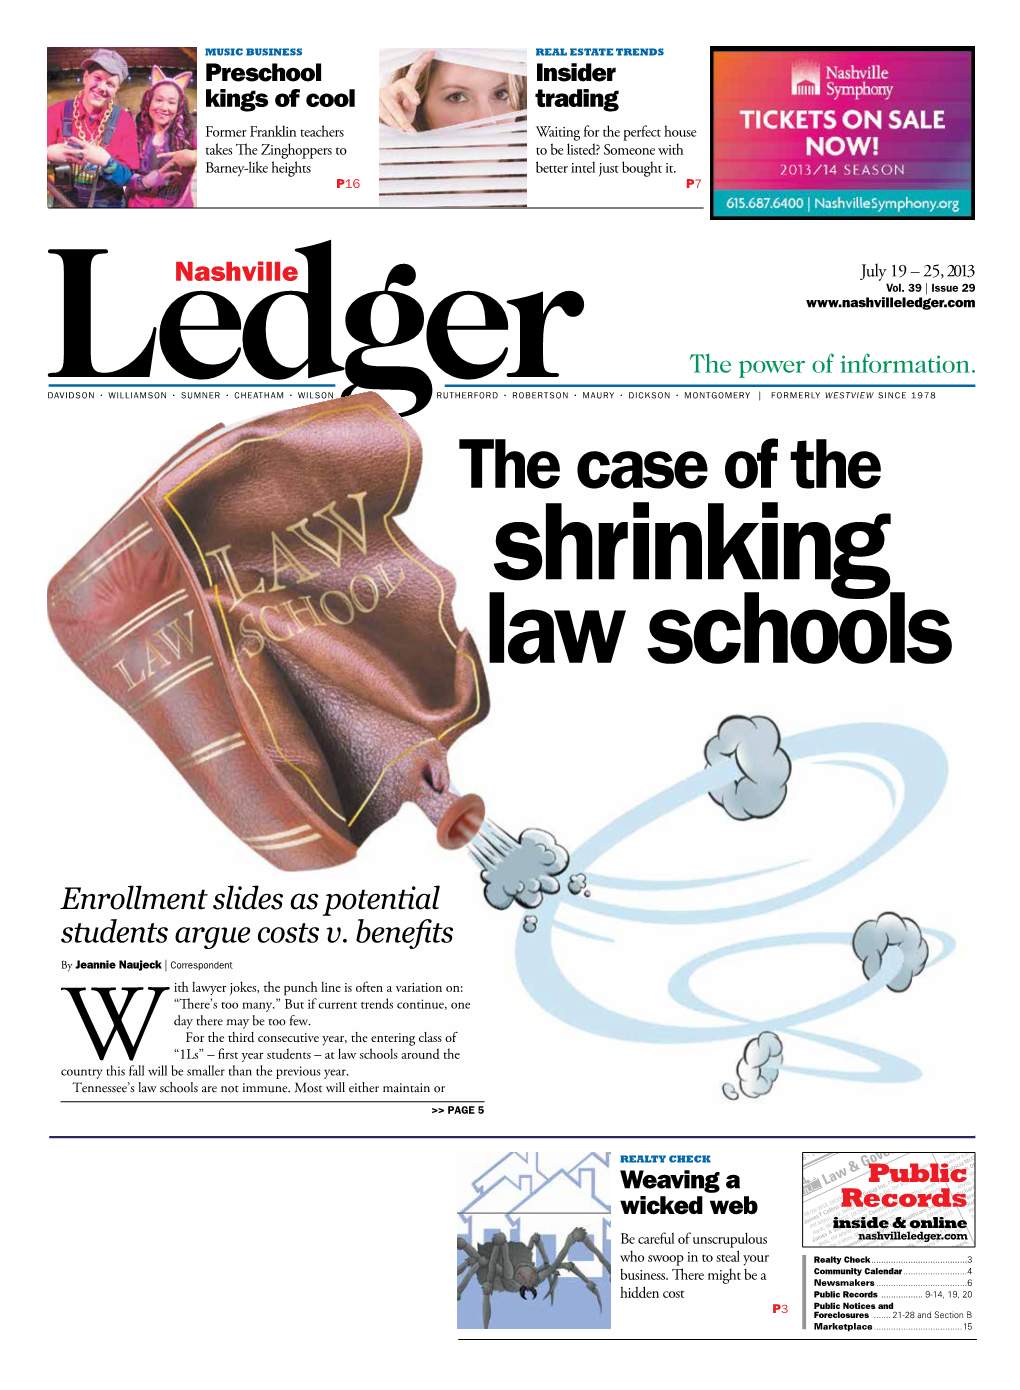 The Case of the Shrinking Law Schools